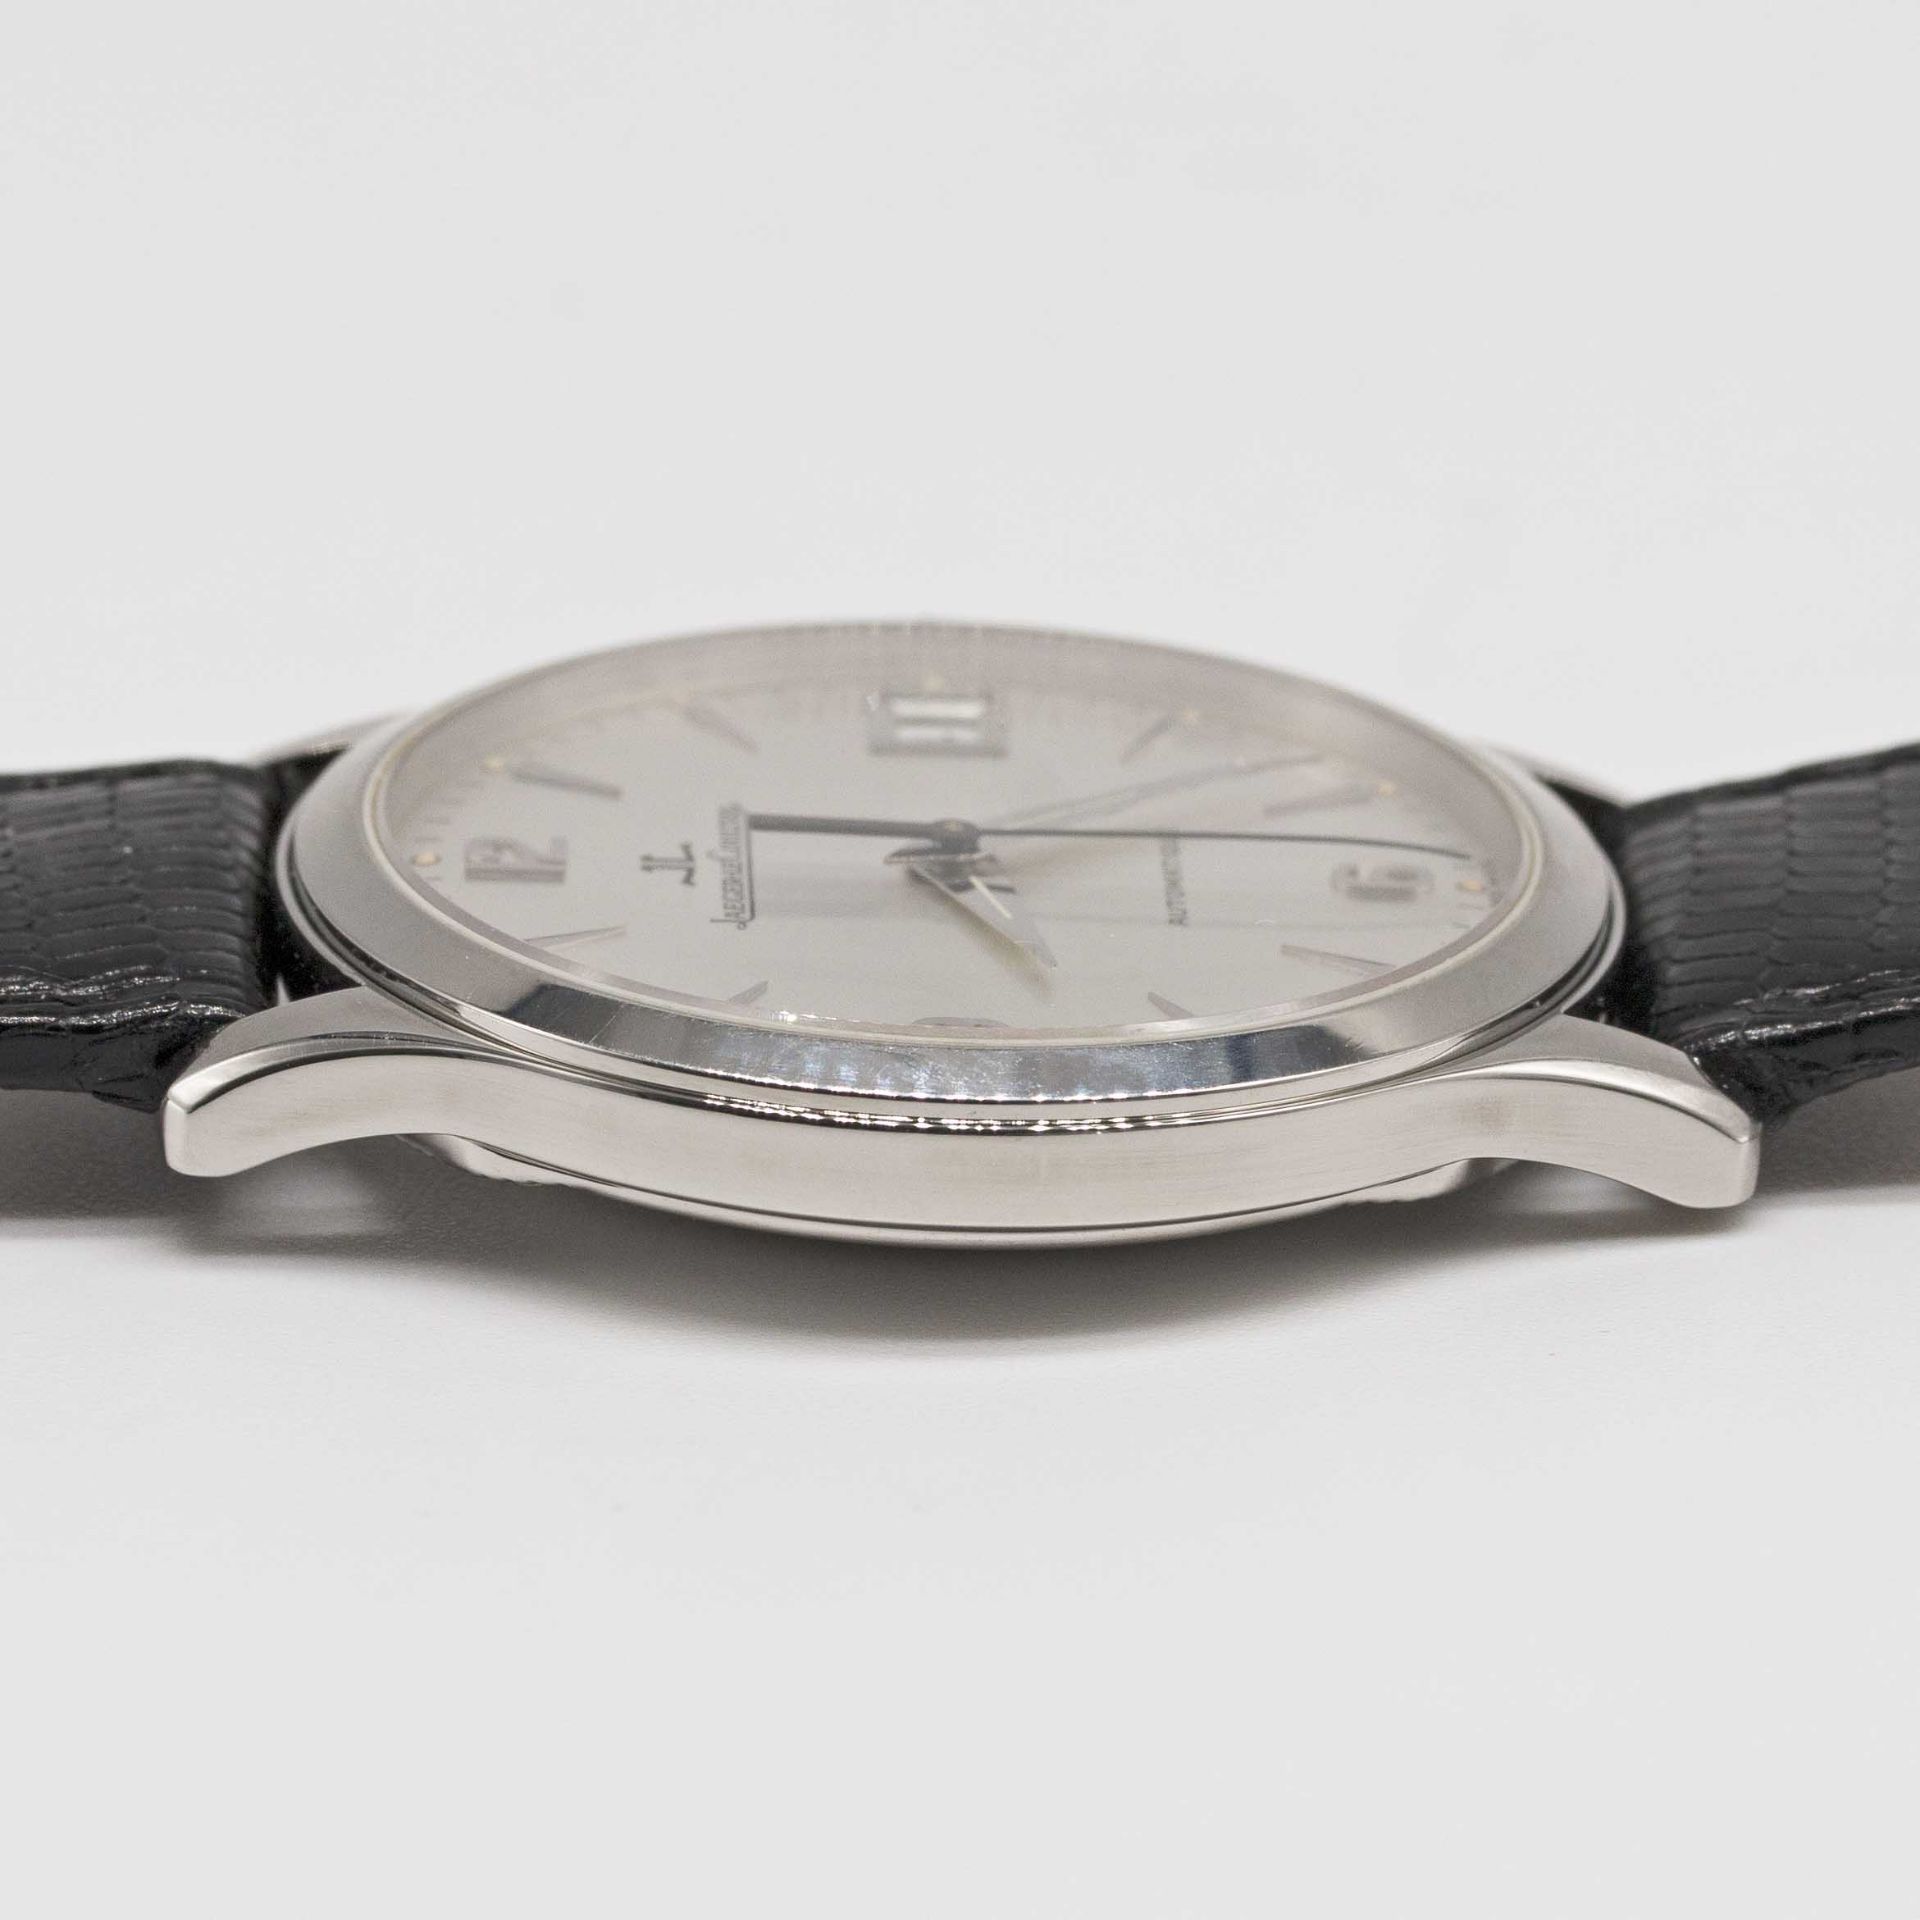 A GENTLEMAN'S STAINLESS STEEL JAEGER LECOULTRE MASTER CONTROL AUTOMATIQUE WRIST WATCH CIRCA 1996, - Image 8 of 8